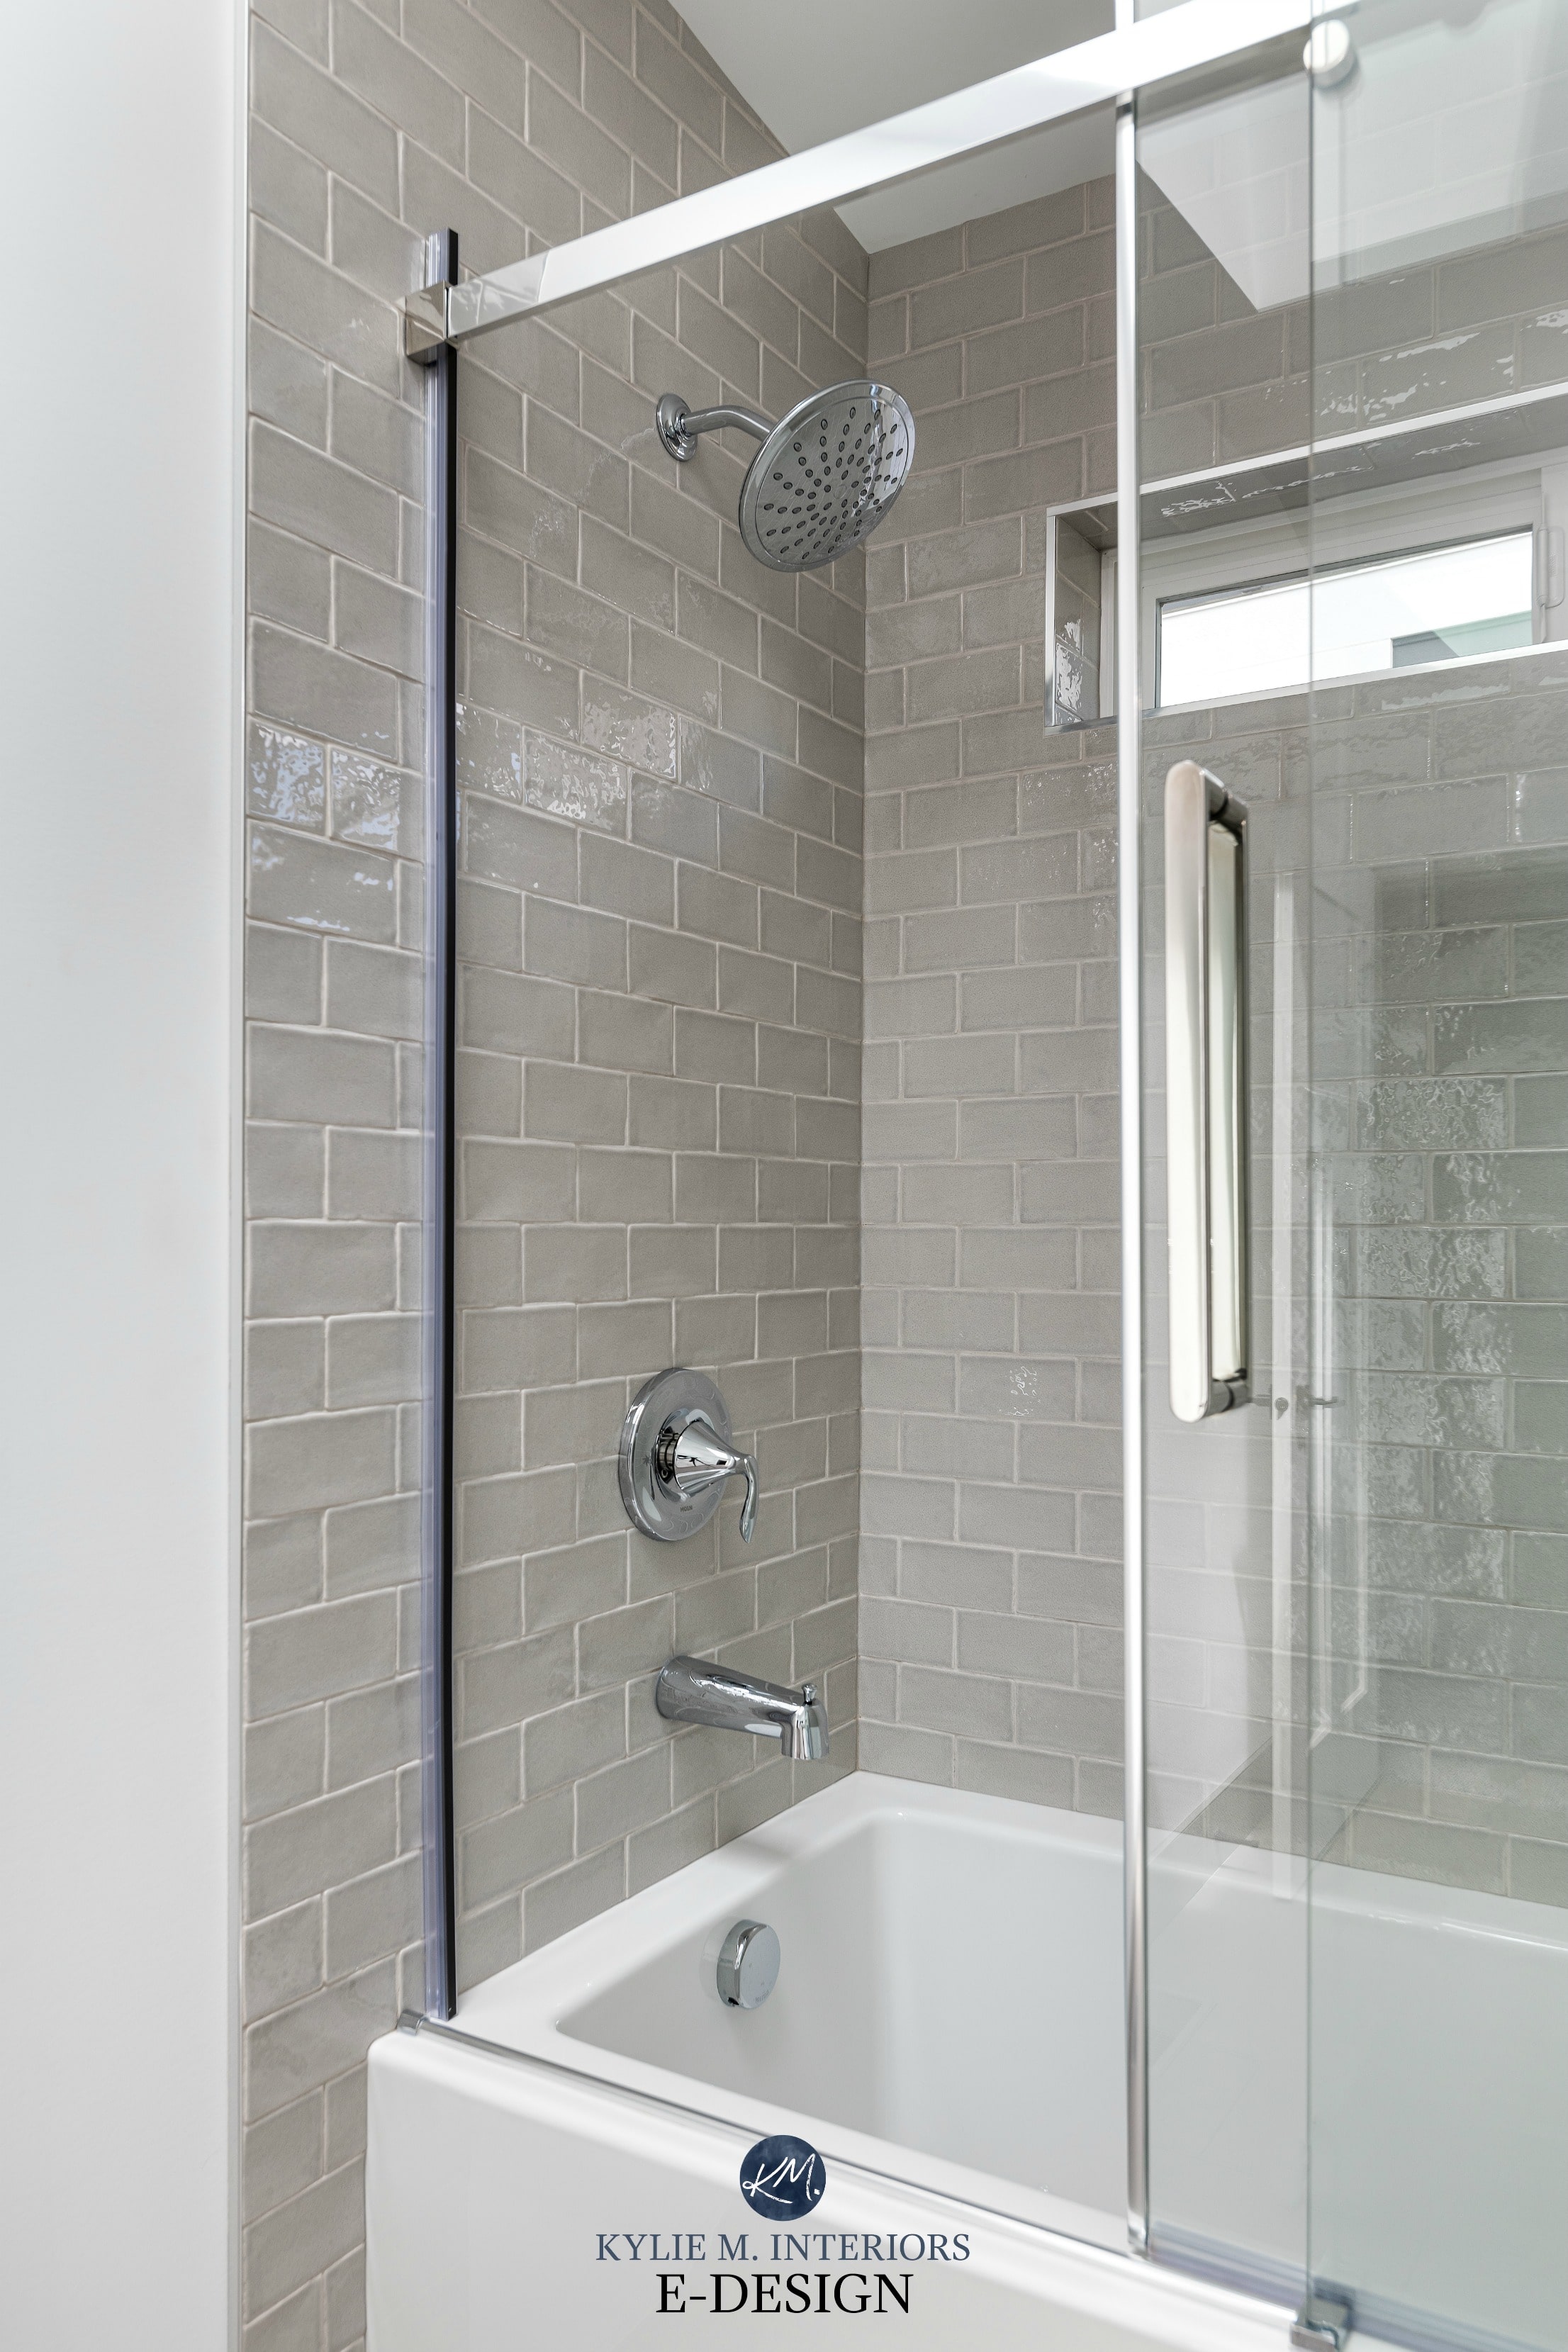 4 Subway Tile Ideas For Your Kitchen, Is Subway Tile Good For Showers